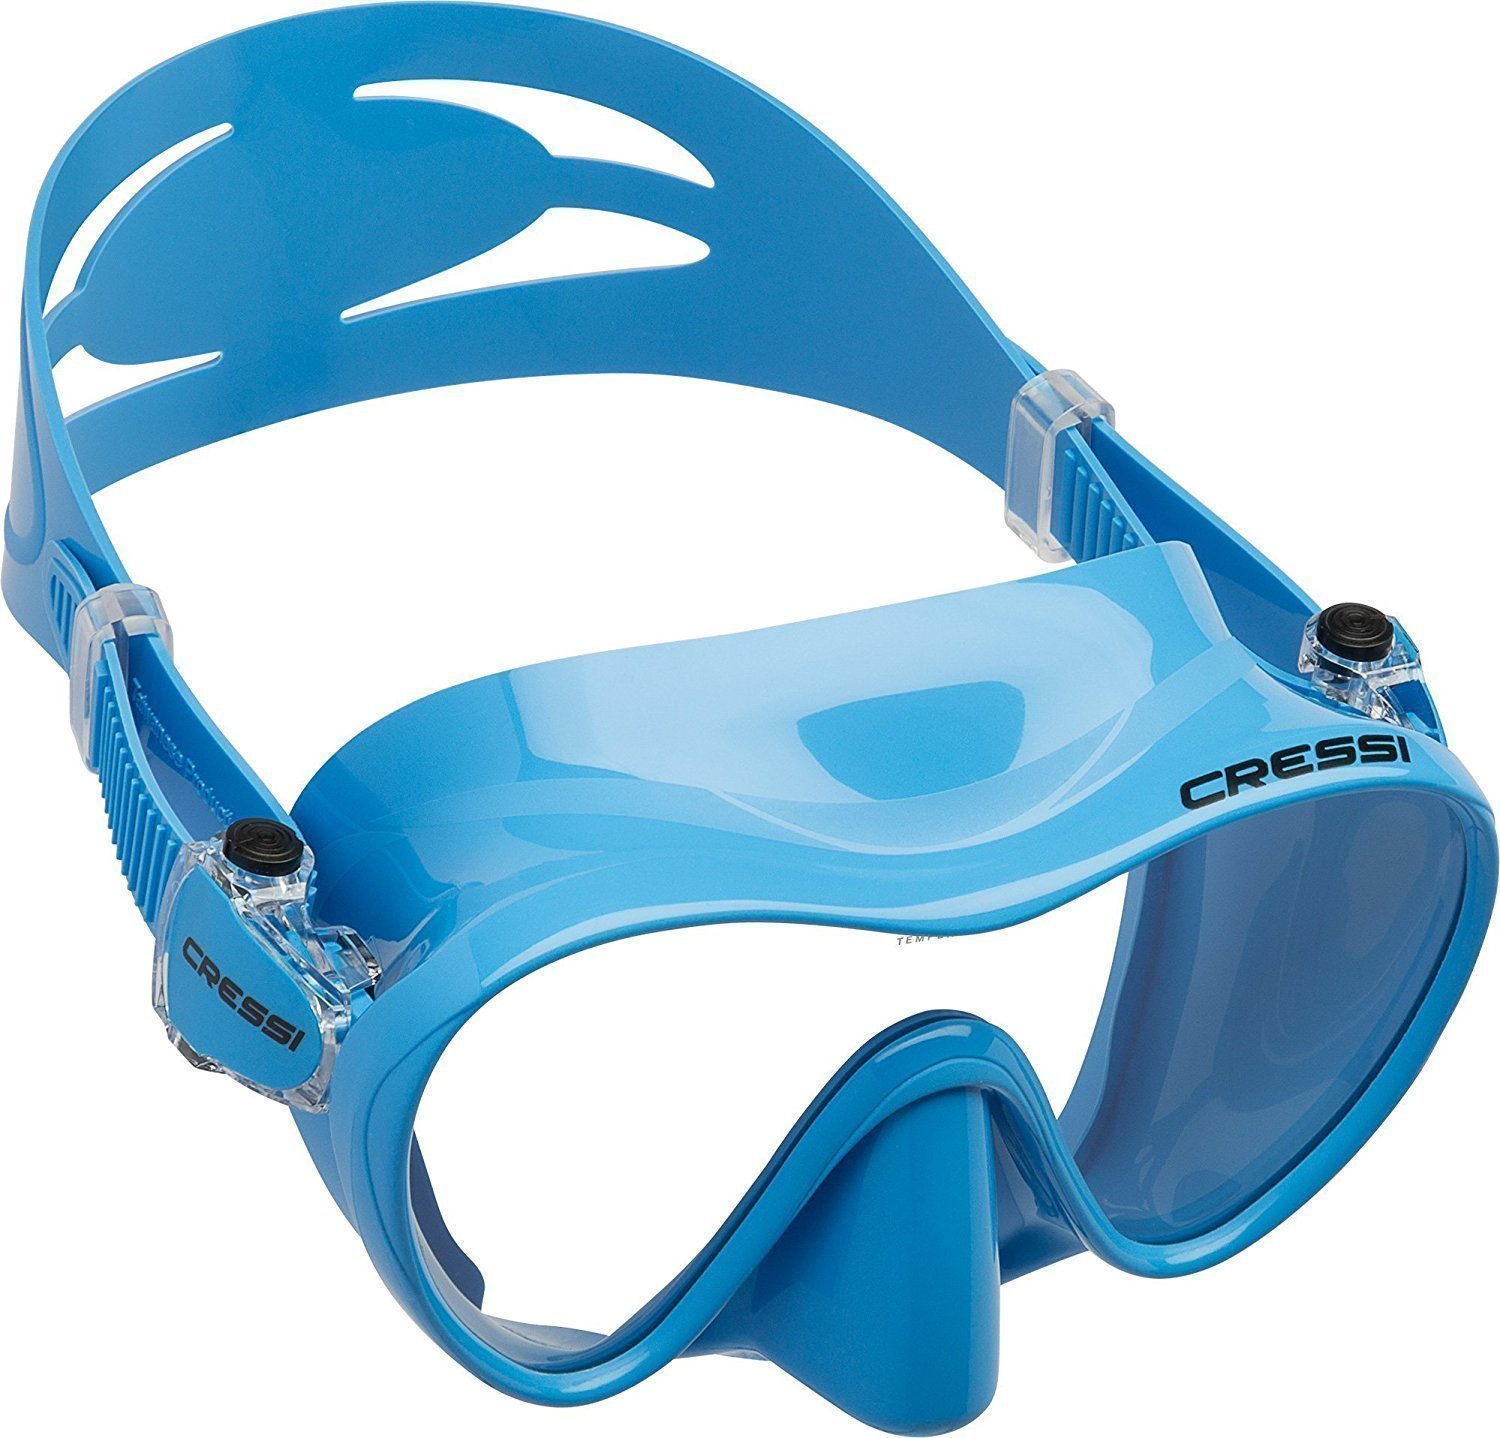 Dykmask Cressi F1 Small Dykmask